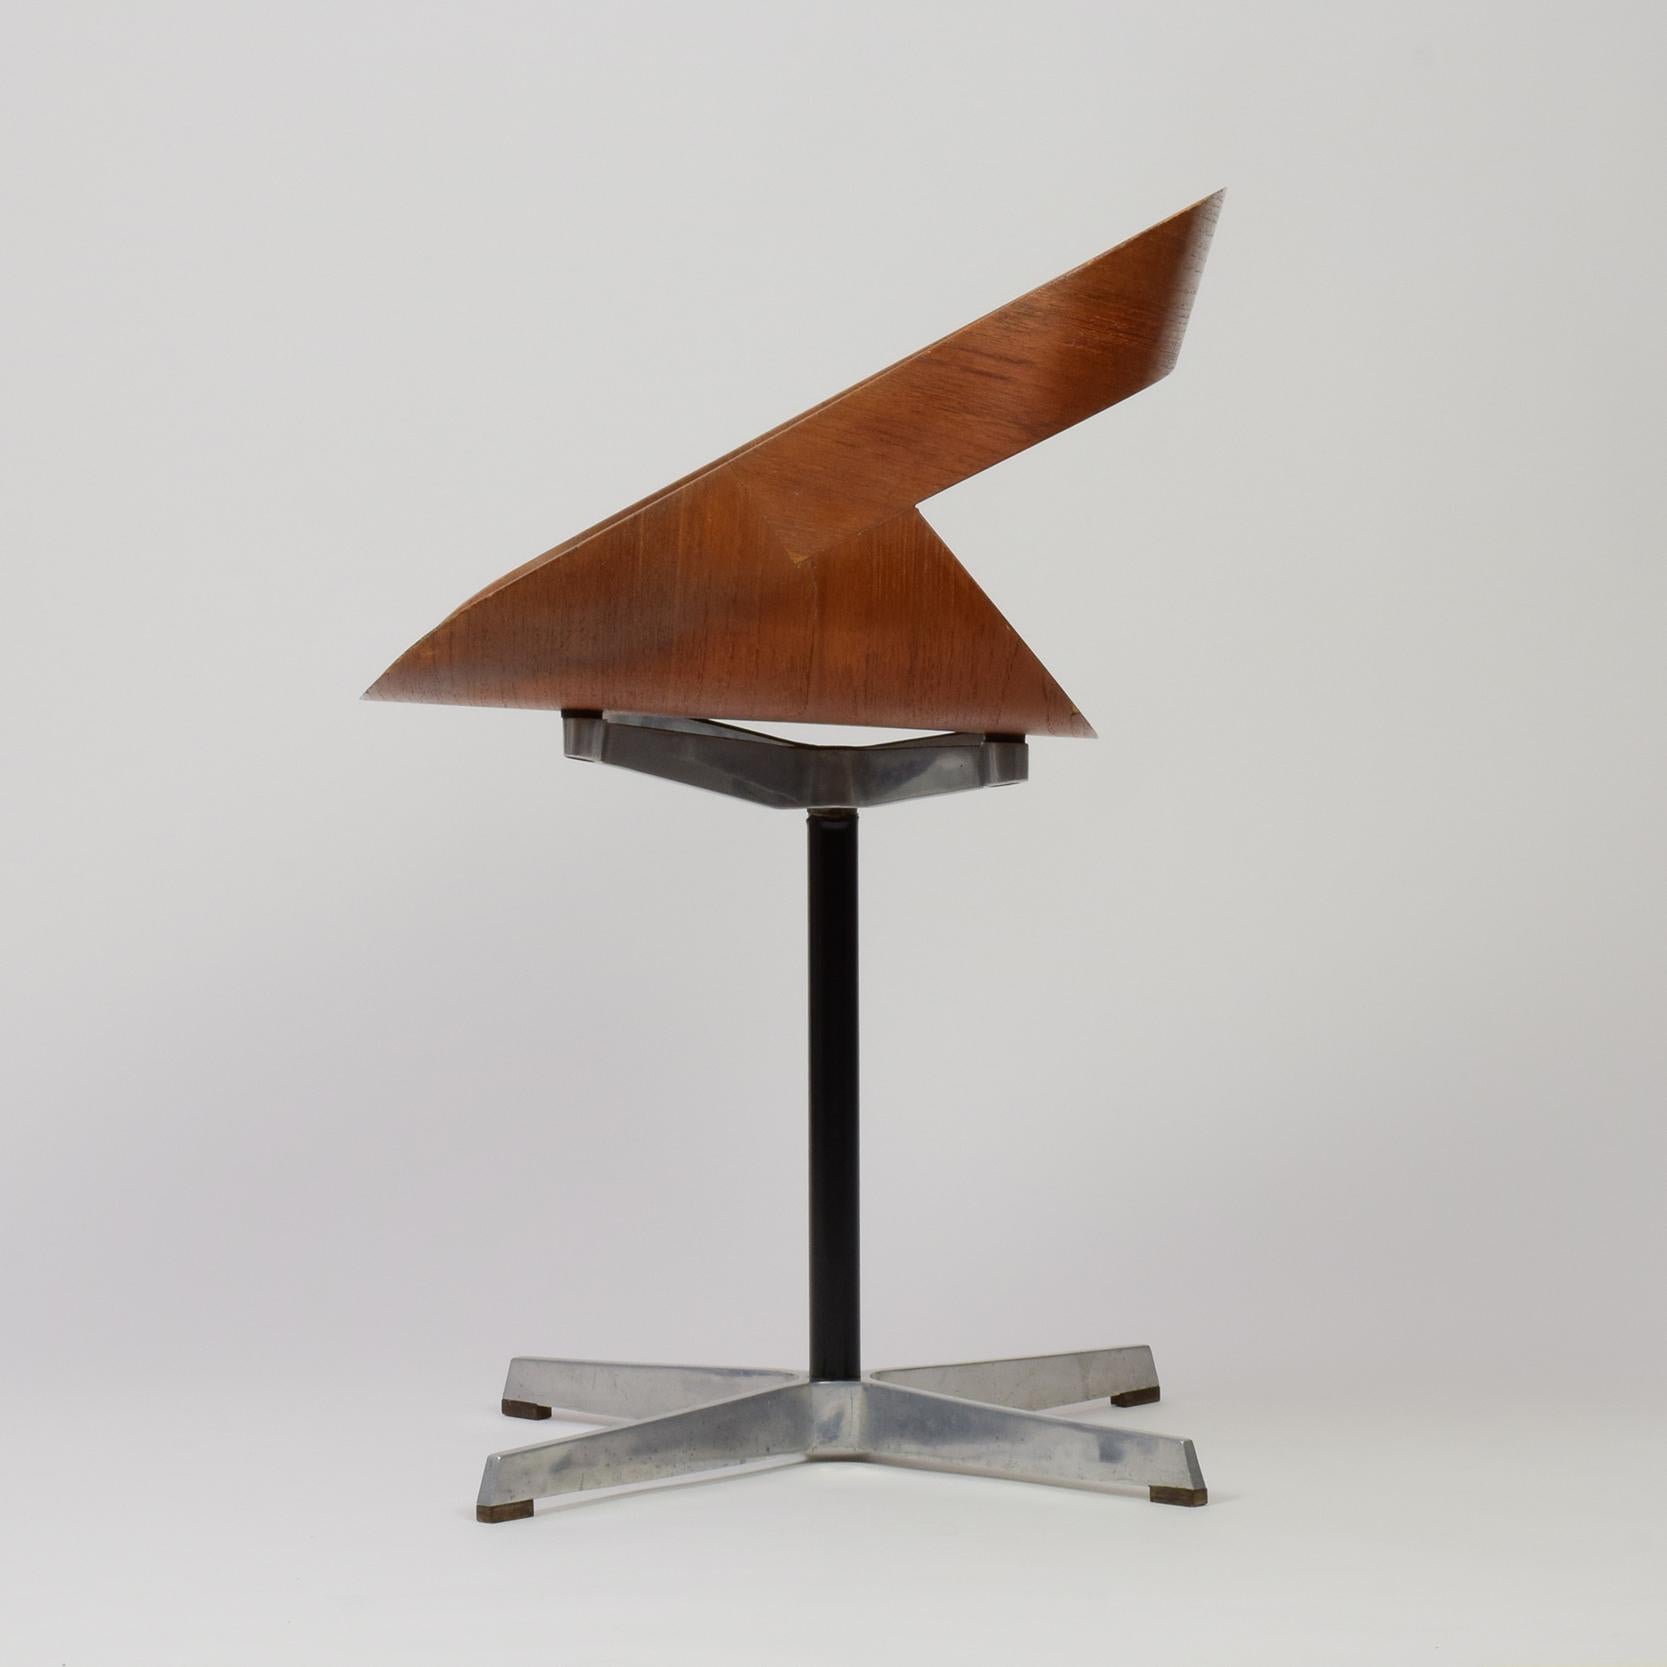 Plywood Geoffrey Harcourt, Chair 130, 'RCA' Chair, Designed 1960, Produced by Artifort For Sale